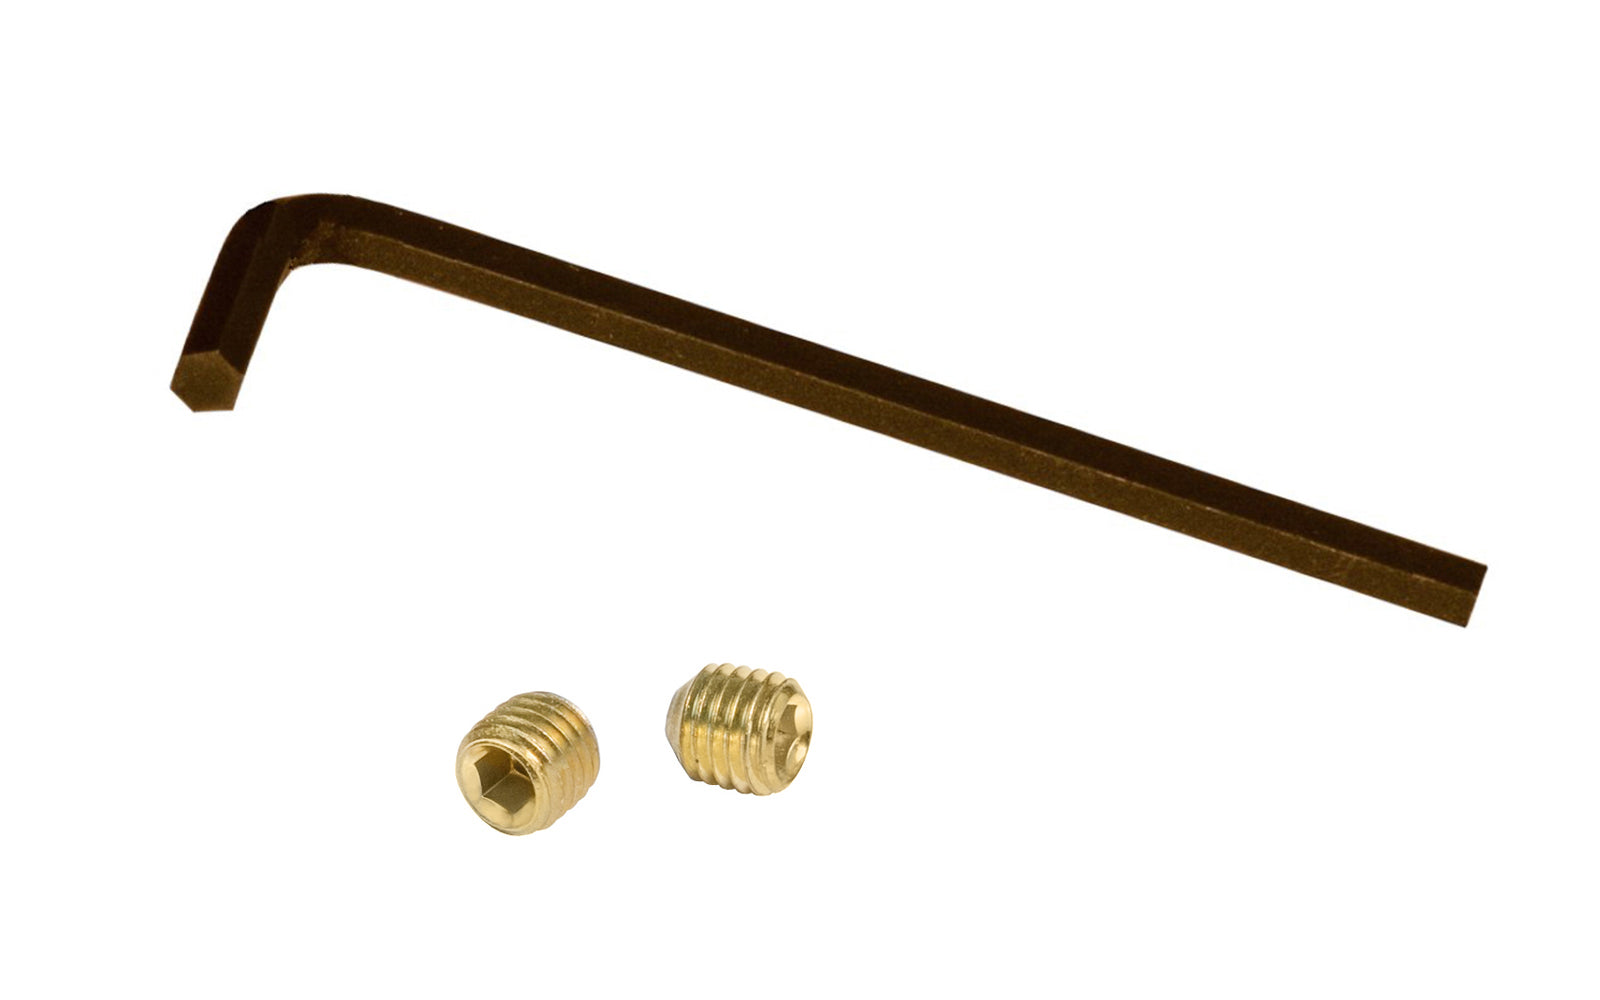 Pair of Set Screws & Hex Key for Doorknobs. The set screws work with traditional-style doorknobs that take threaded spindles. The thread size of the set screw is 32 TPI x 1/4" diameter size, which is a common thread size for holes on old-style doorknobs. Brass finish.